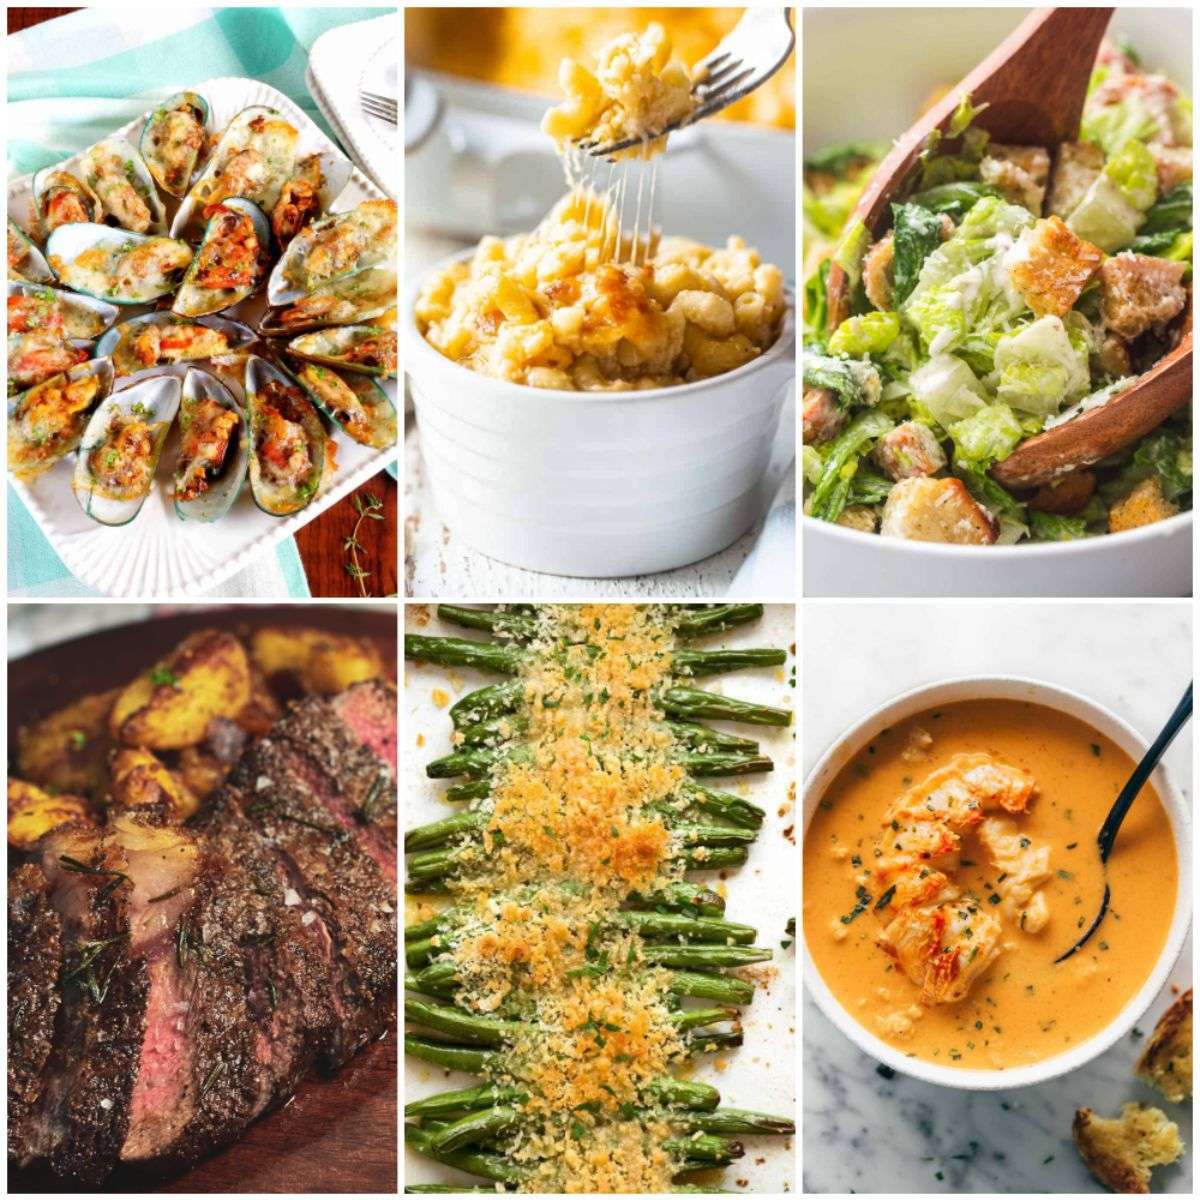 Lobster side dishes